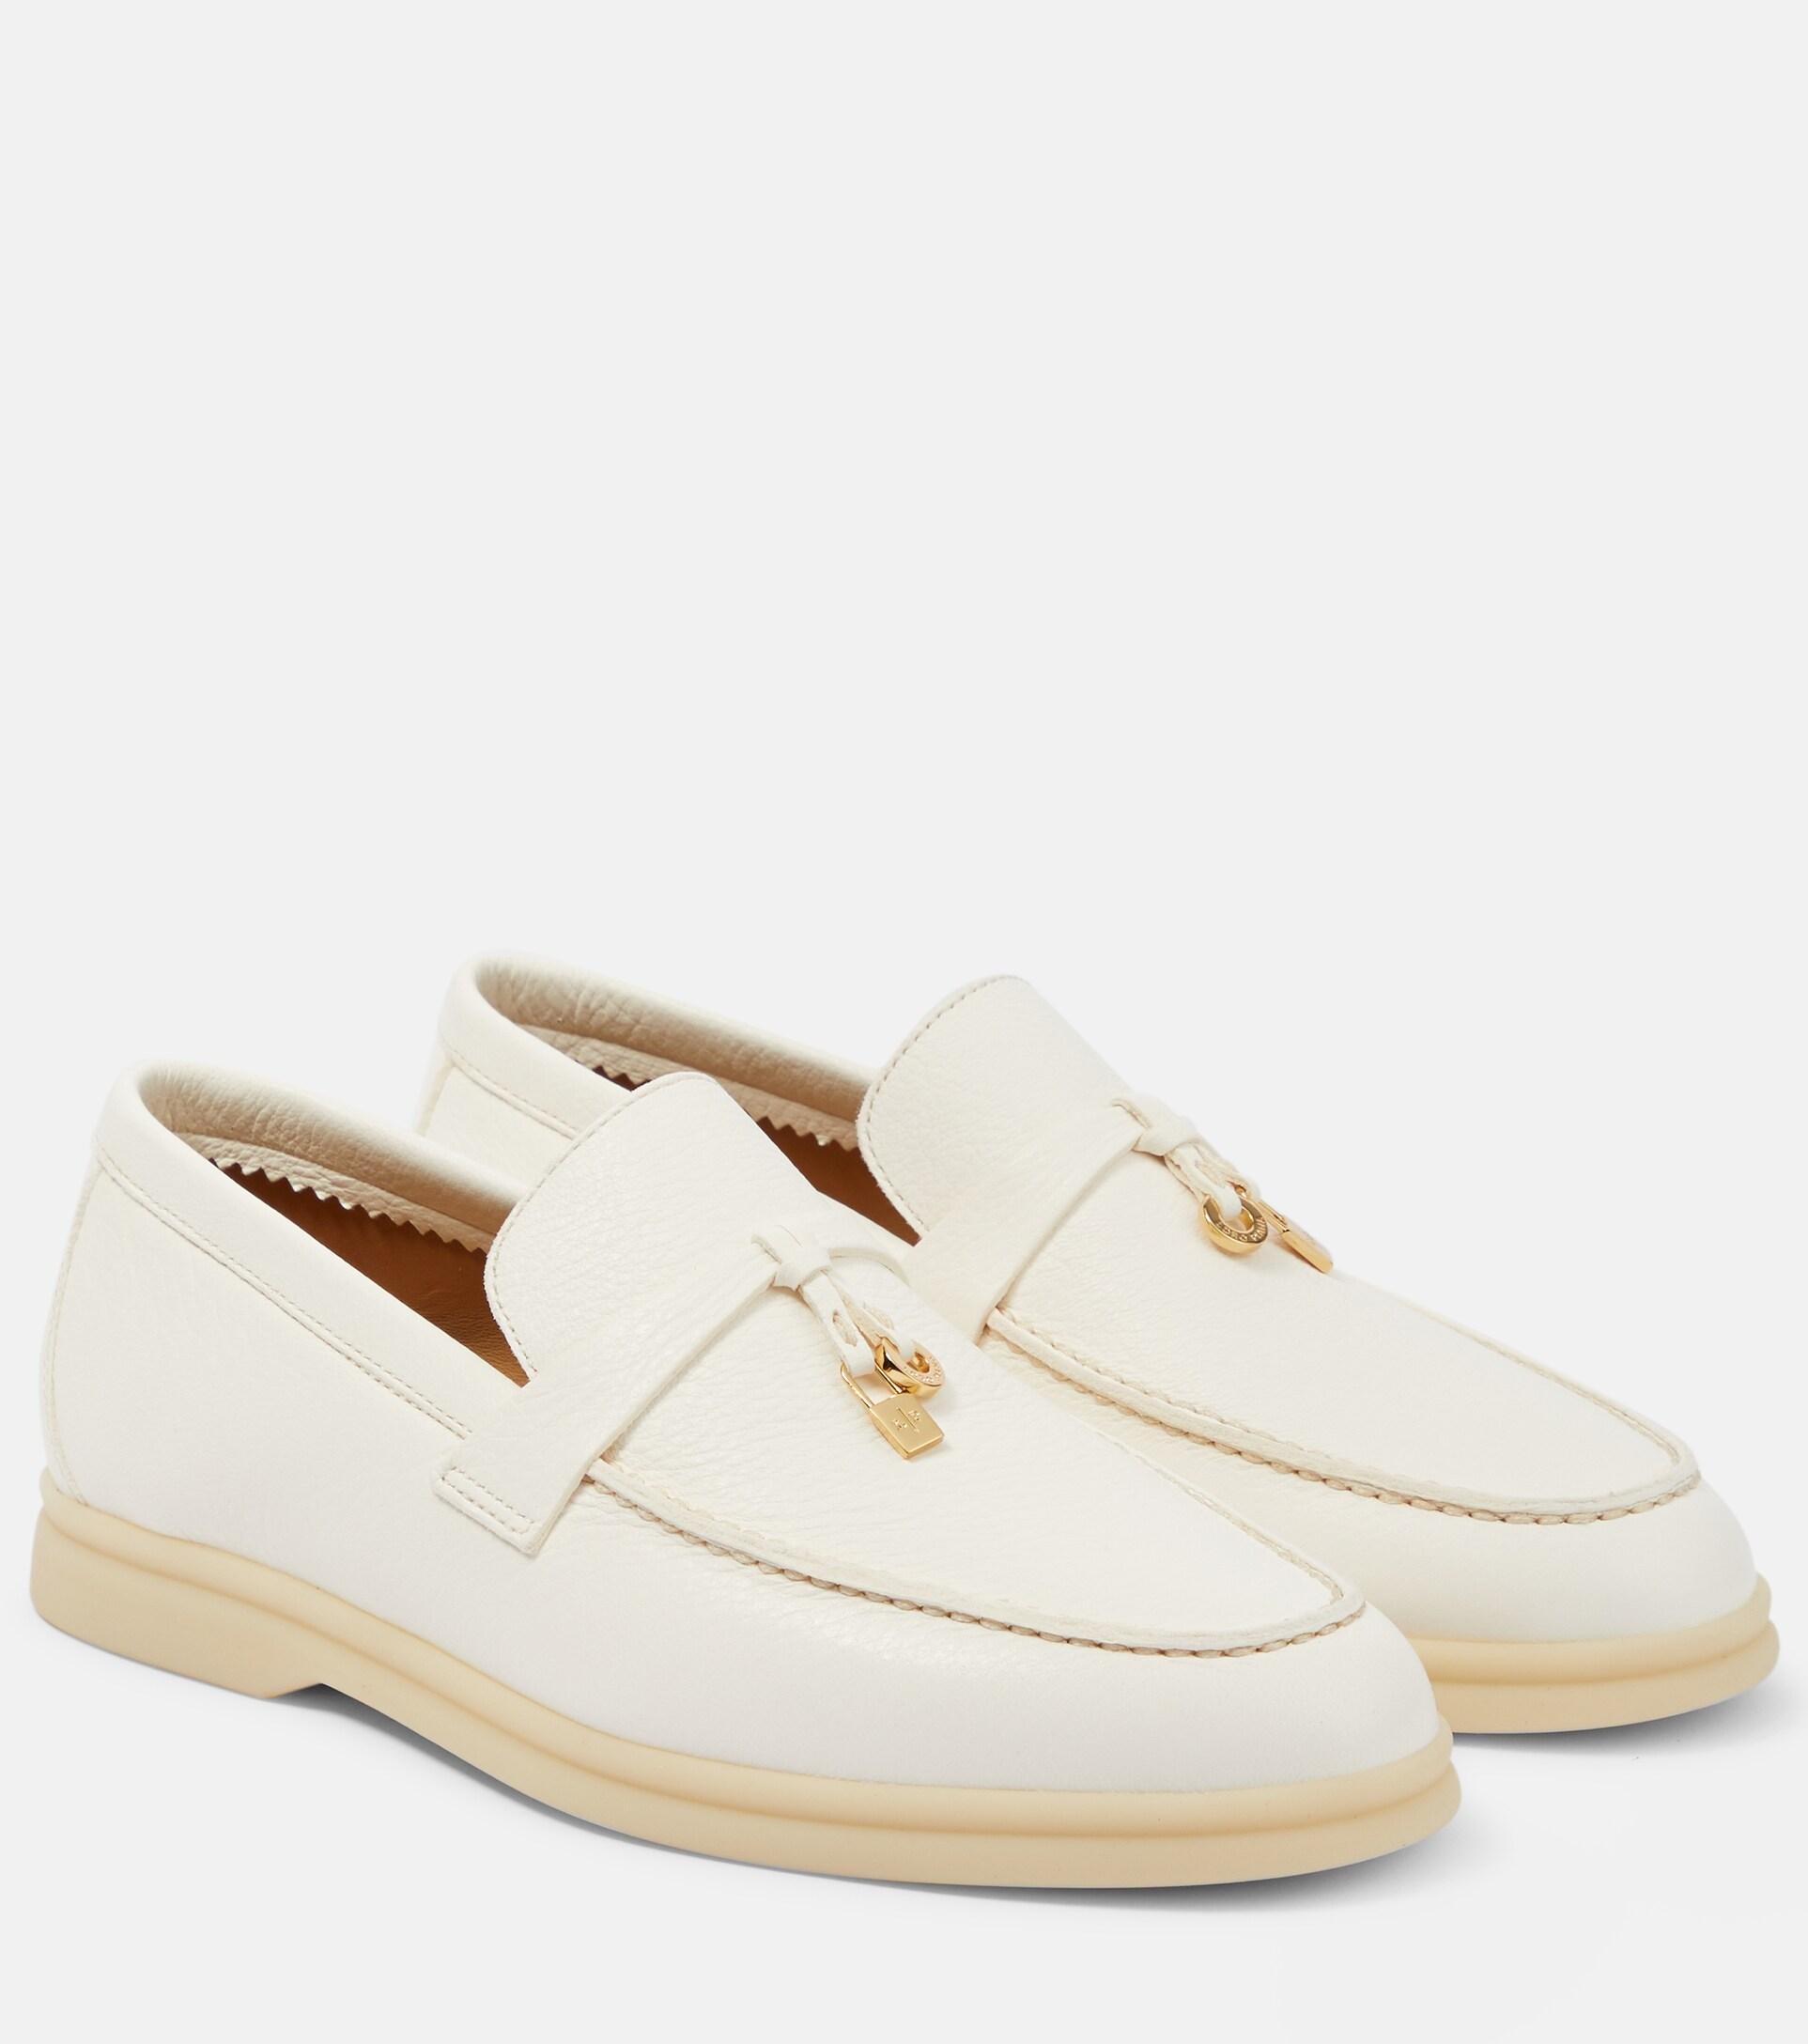 Loro Piana Summer Charms Walk Leather Loafers in White | Lyst